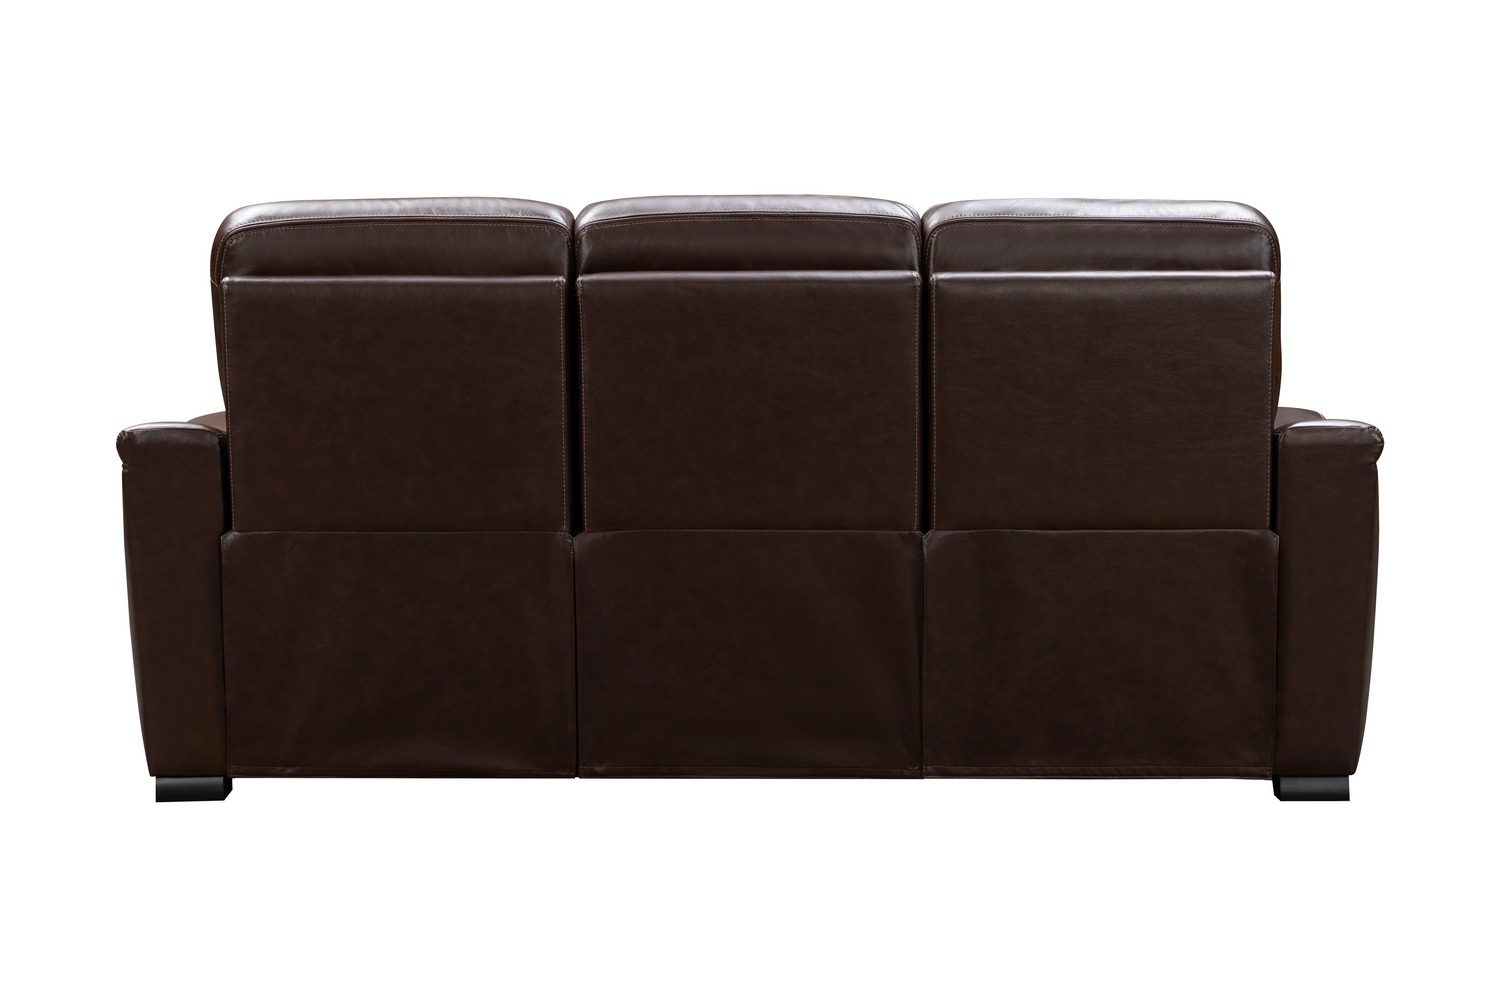 Barcalounger Electra Power Reclining Sofa with Power Head Rests and Power Lumbar - Castleton Rustic Brown/Leather Match